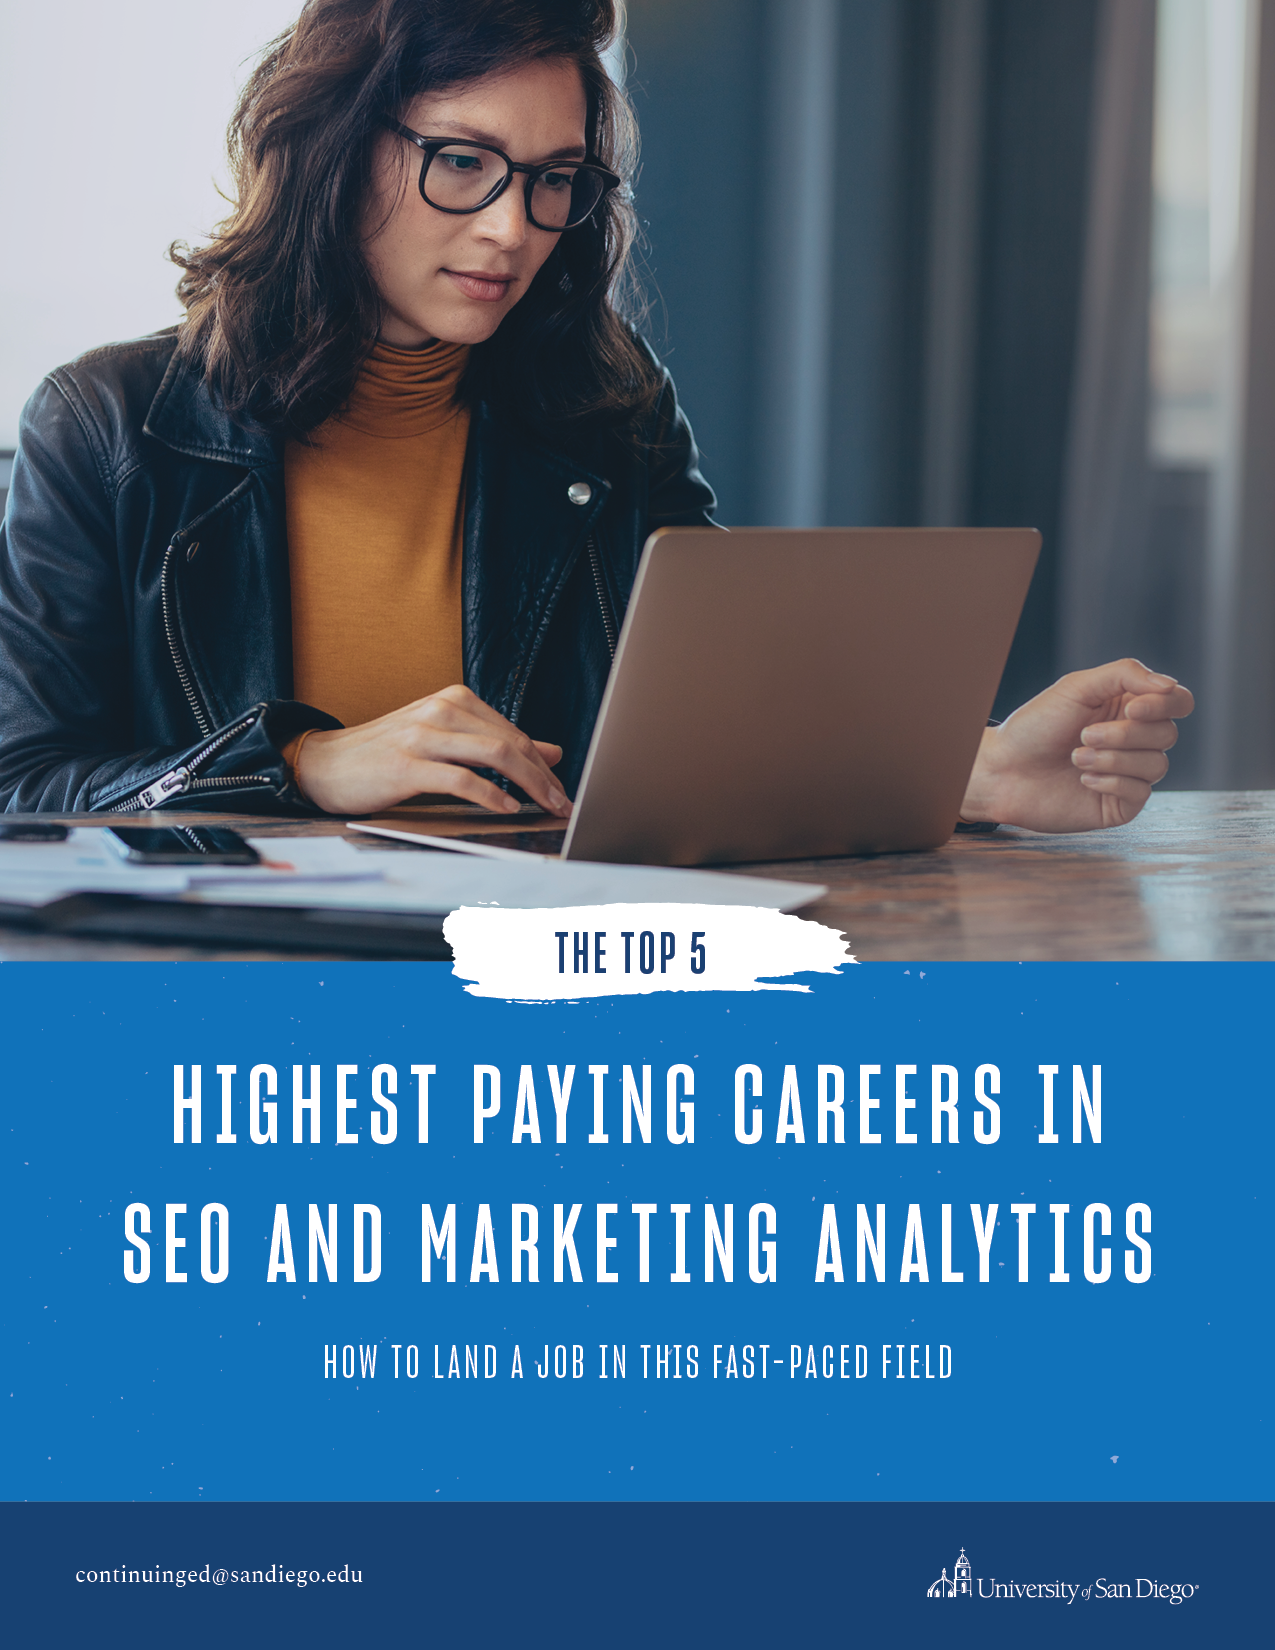 The 5 Highest Paying Careers in SEO and Marketing Analytics